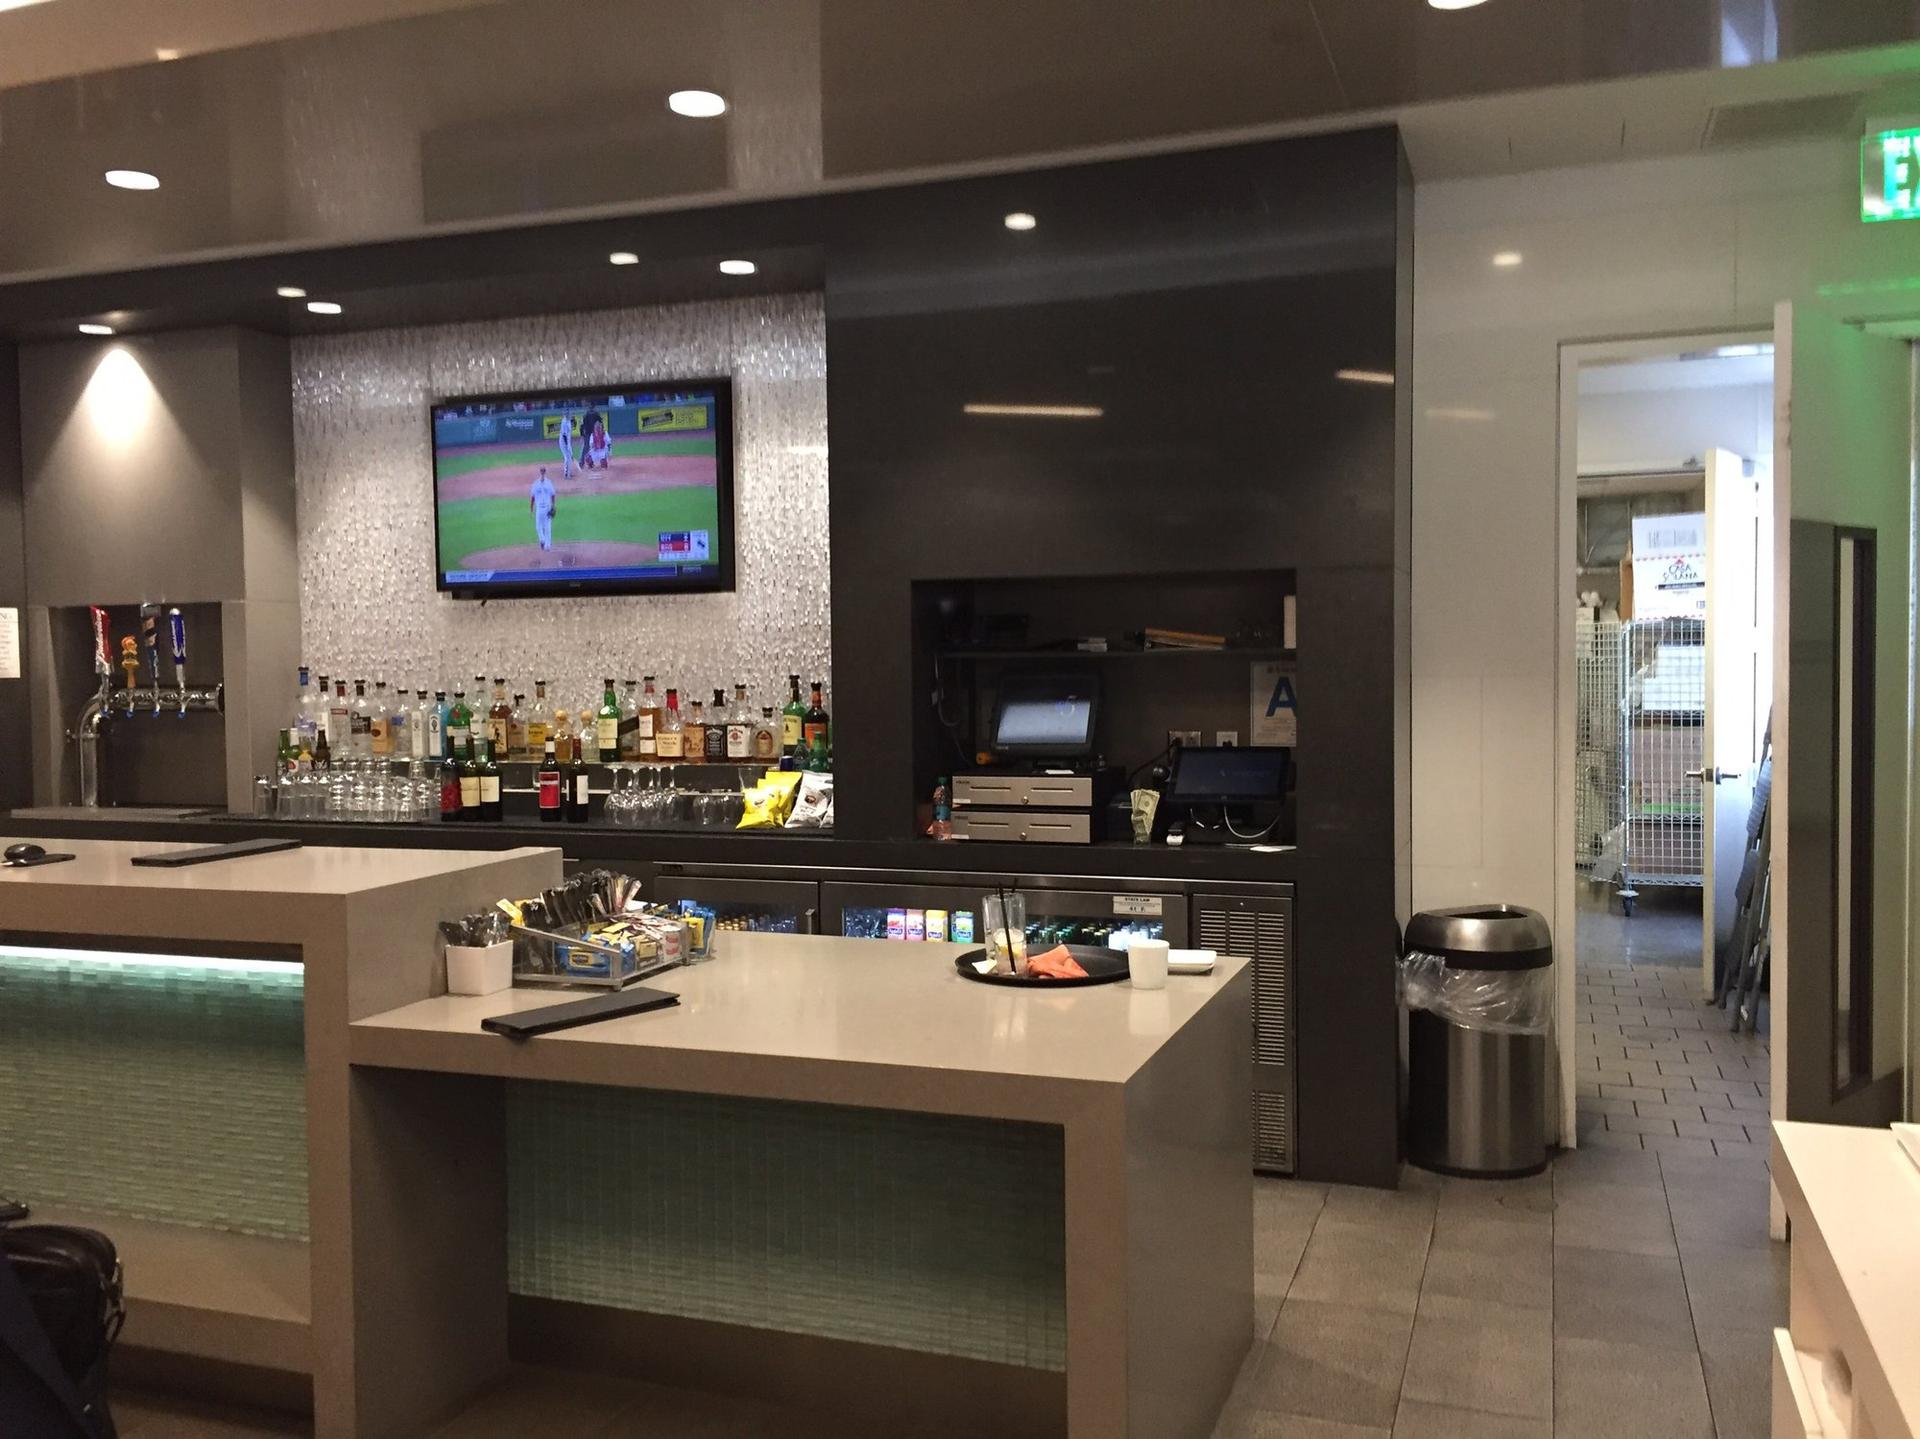 American Airlines Admirals Club image 33 of 43